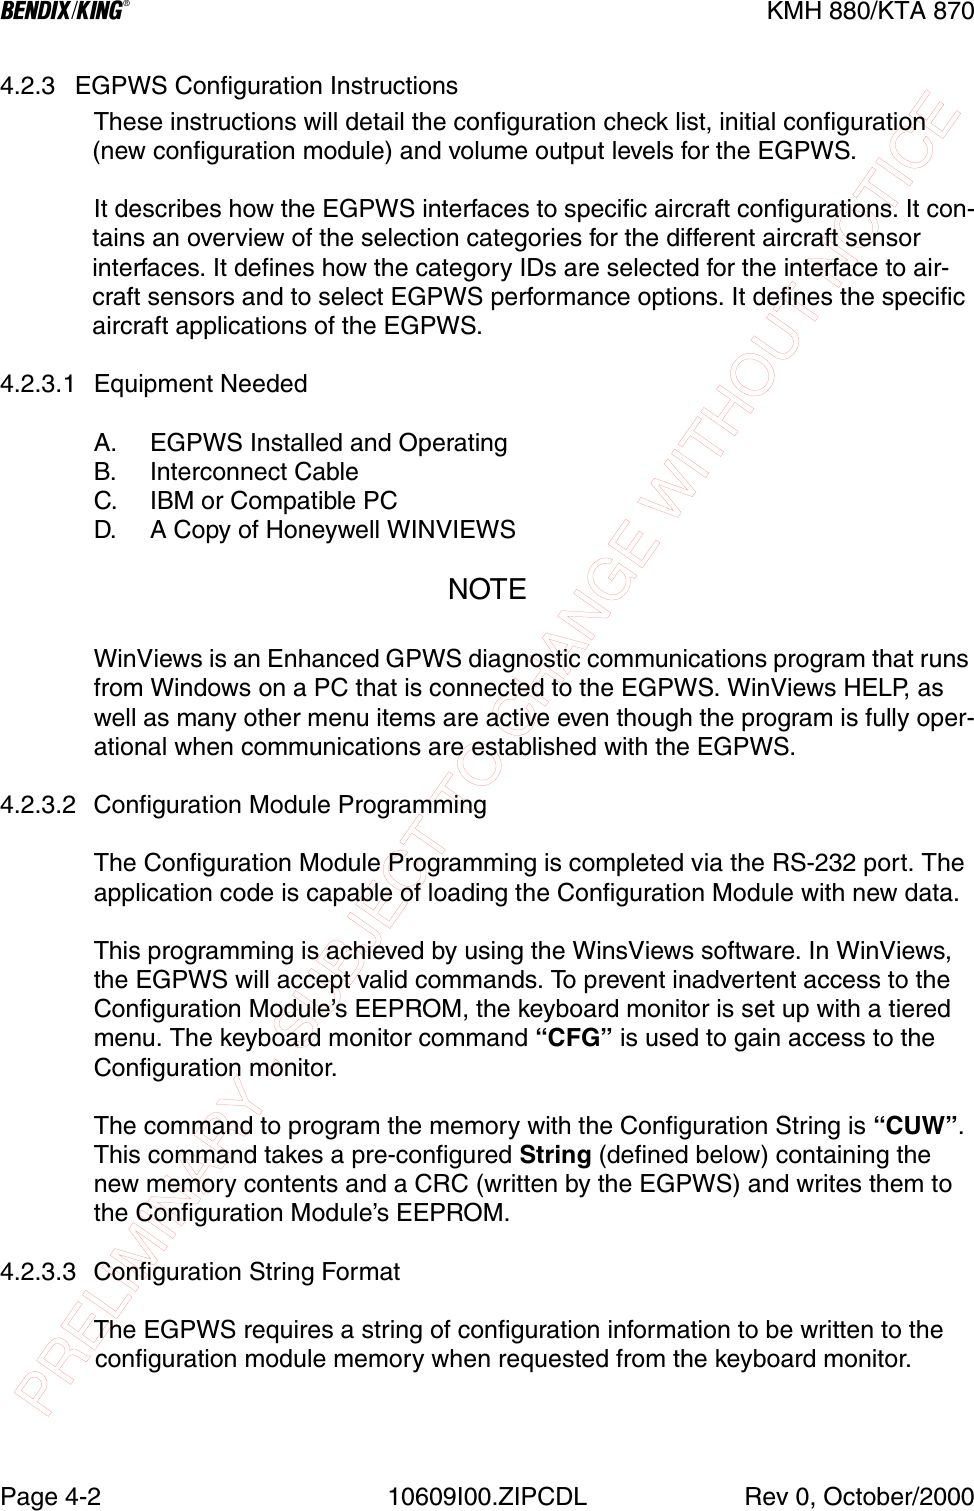 PRELIMINARY - SUBJECT TO CHANGE WITHOUT NOTICEBKMH 880/KTA 870Page 4-2 10609I00.ZIPCDL Rev 0, October/20004.2.3 EGPWS Configuration InstructionsThese instructions will detail the configuration check list, initial configuration (new configuration module) and volume output levels for the EGPWS.It describes how the EGPWS interfaces to specific aircraft configurations. It con-tains an overview of the selection categories for the different aircraft sensor interfaces. It defines how the category IDs are selected for the interface to air-craft sensors and to select EGPWS performance options. It defines the specific aircraft applications of the EGPWS.4.2.3.1 Equipment NeededA. EGPWS Installed and OperatingB. Interconnect CableC. IBM or Compatible PCD. A Copy of Honeywell WINVIEWSNOTEWinViews is an Enhanced GPWS diagnostic communications program that runs from Windows on a PC that is connected to the EGPWS. WinViews HELP, as well as many other menu items are active even though the program is fully oper-ational when communications are established with the EGPWS.4.2.3.2 Configuration Module ProgrammingThe Configuration Module Programming is completed via the RS-232 port. The application code is capable of loading the Configuration Module with new data.This programming is achieved by using the WinsViews software. In WinViews, the EGPWS will accept valid commands. To prevent inadvertent access to the Configuration Module’s EEPROM, the keyboard monitor is set up with a tiered menu. The keyboard monitor command “CFG” is used to gain access to the Configuration monitor.The command to program the memory with the Configuration String is “CUW”.This command takes a pre-configured String (defined below) containing the new memory contents and a CRC (written by the EGPWS) and writes them to the Configuration Module’s EEPROM.4.2.3.3 Configuration String FormatThe EGPWS requires a string of configuration information to be written to the configuration module memory when requested from the keyboard monitor.